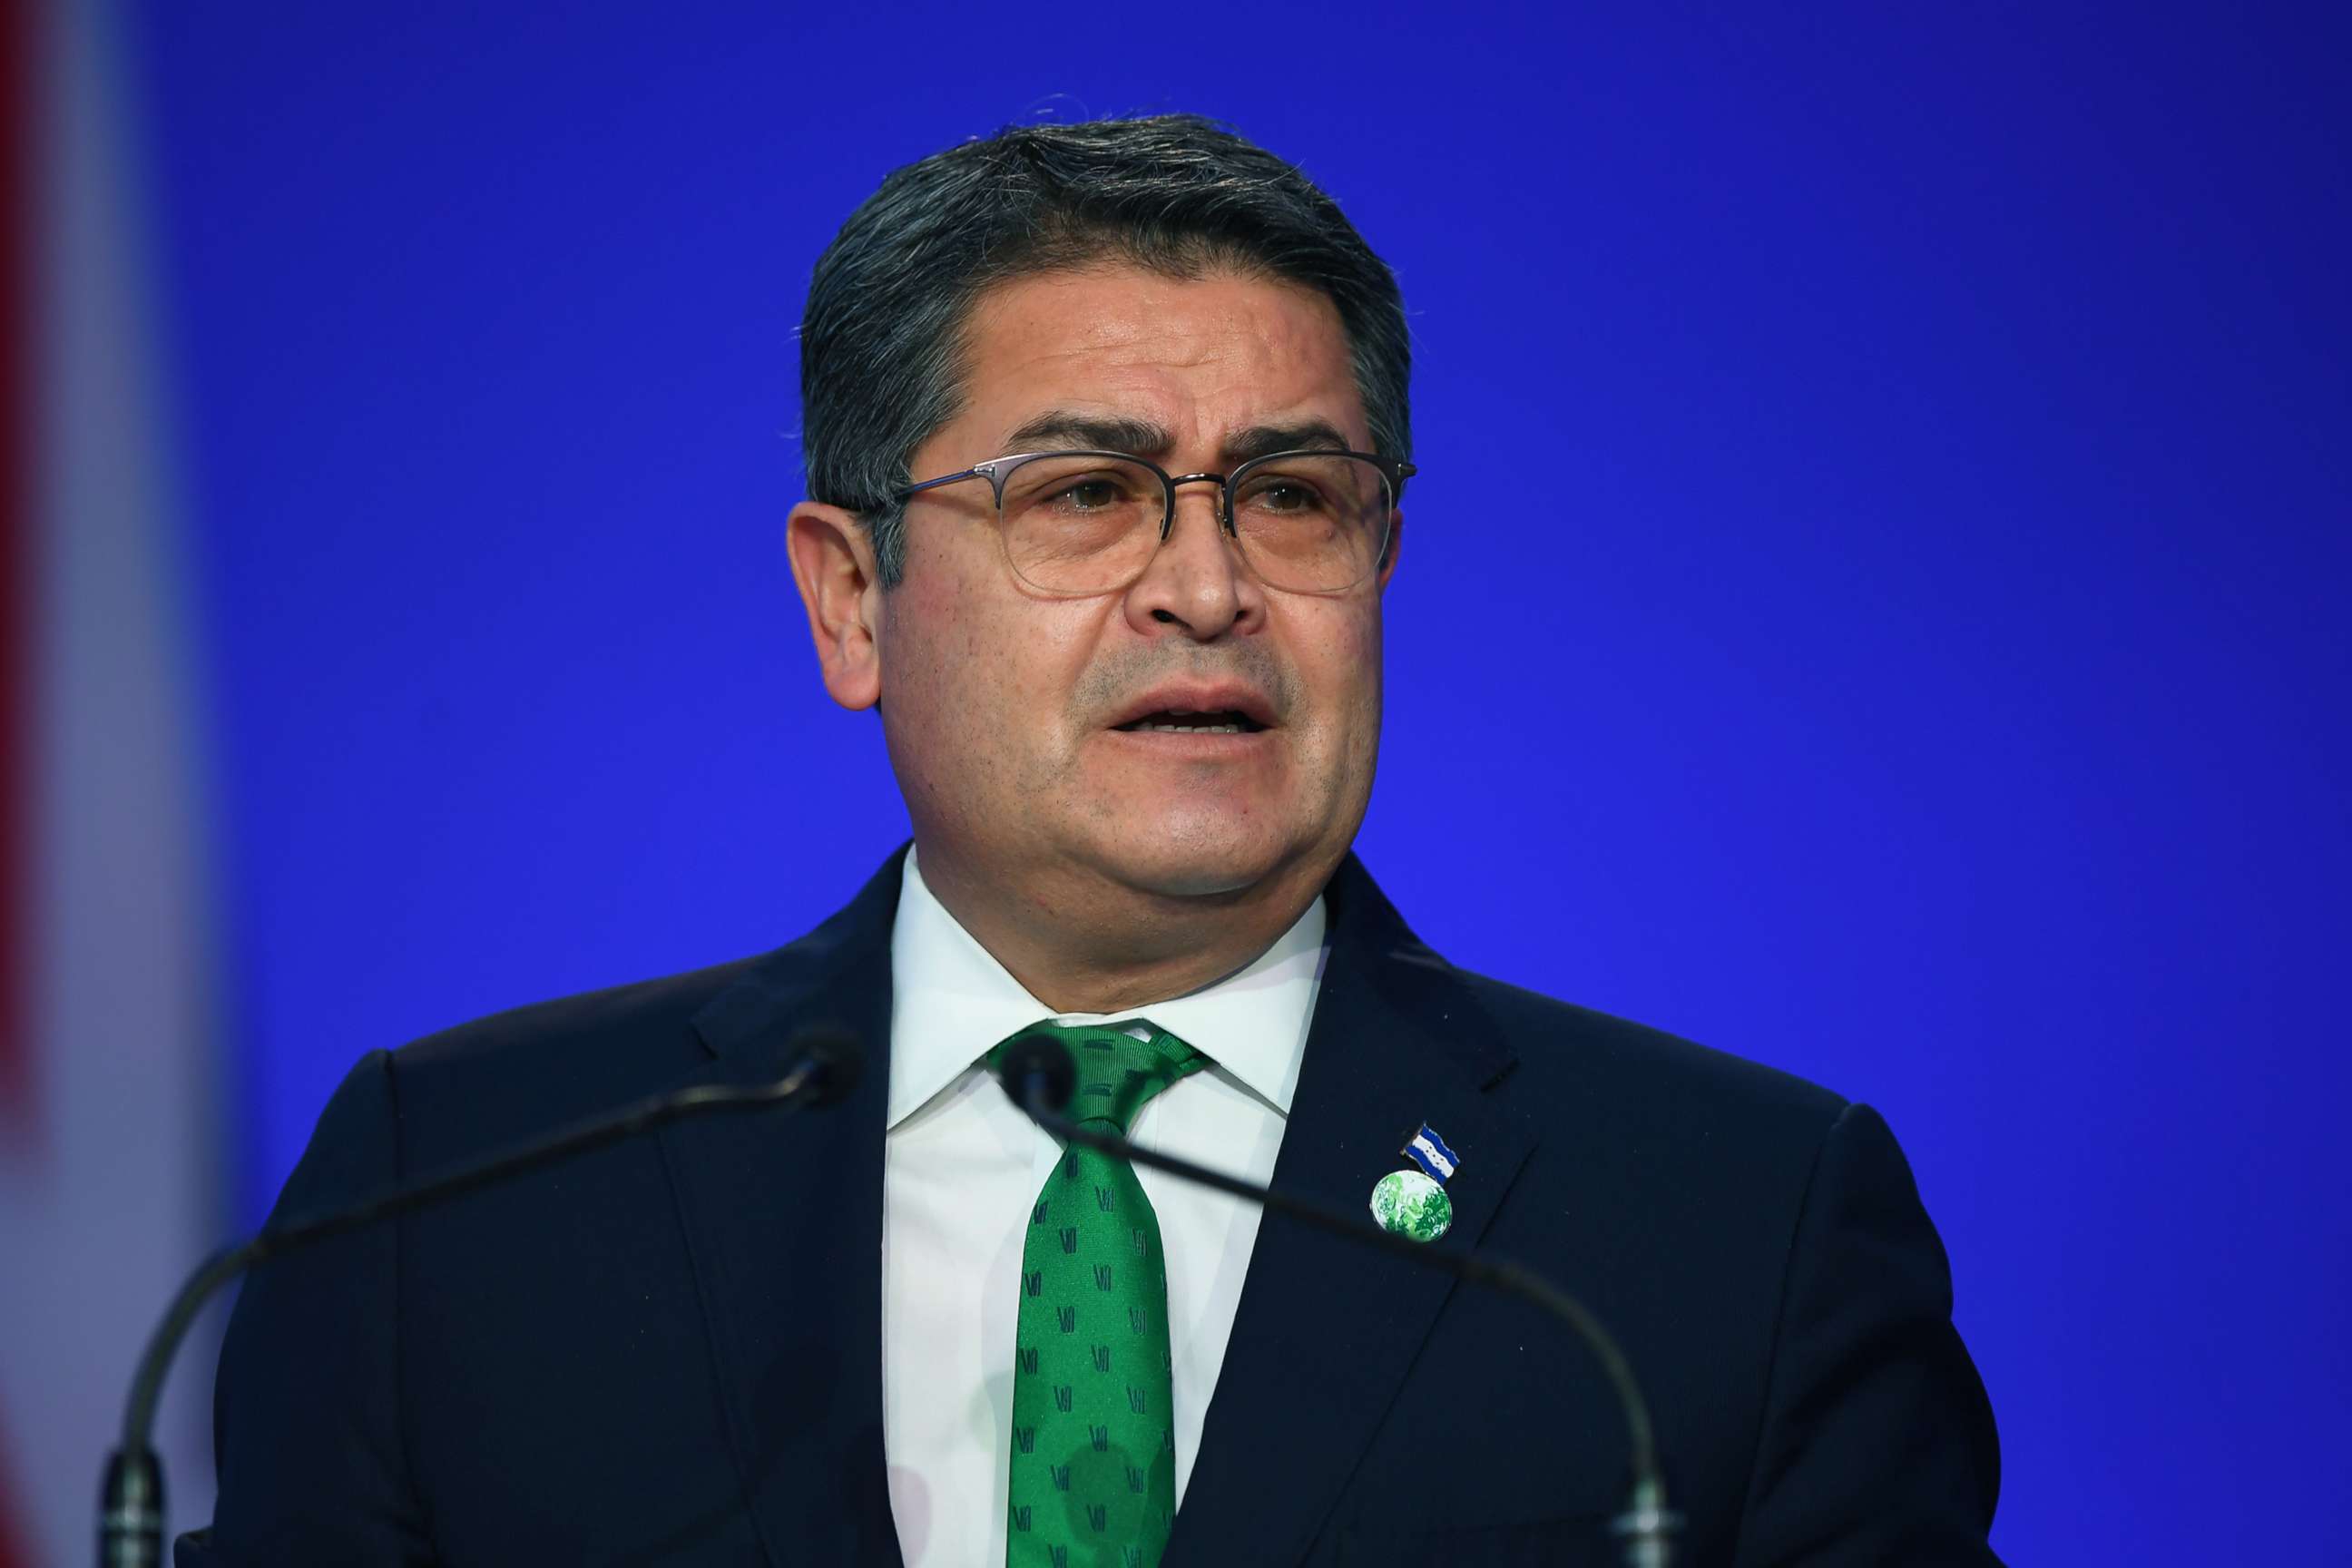 PHOTO: In this Nov. 1, 2021, file photo, Honduran President Juan Orlando Hernandez presents his national statement during day two of COP26 at SECC, in Glasgow, United Kingdom.